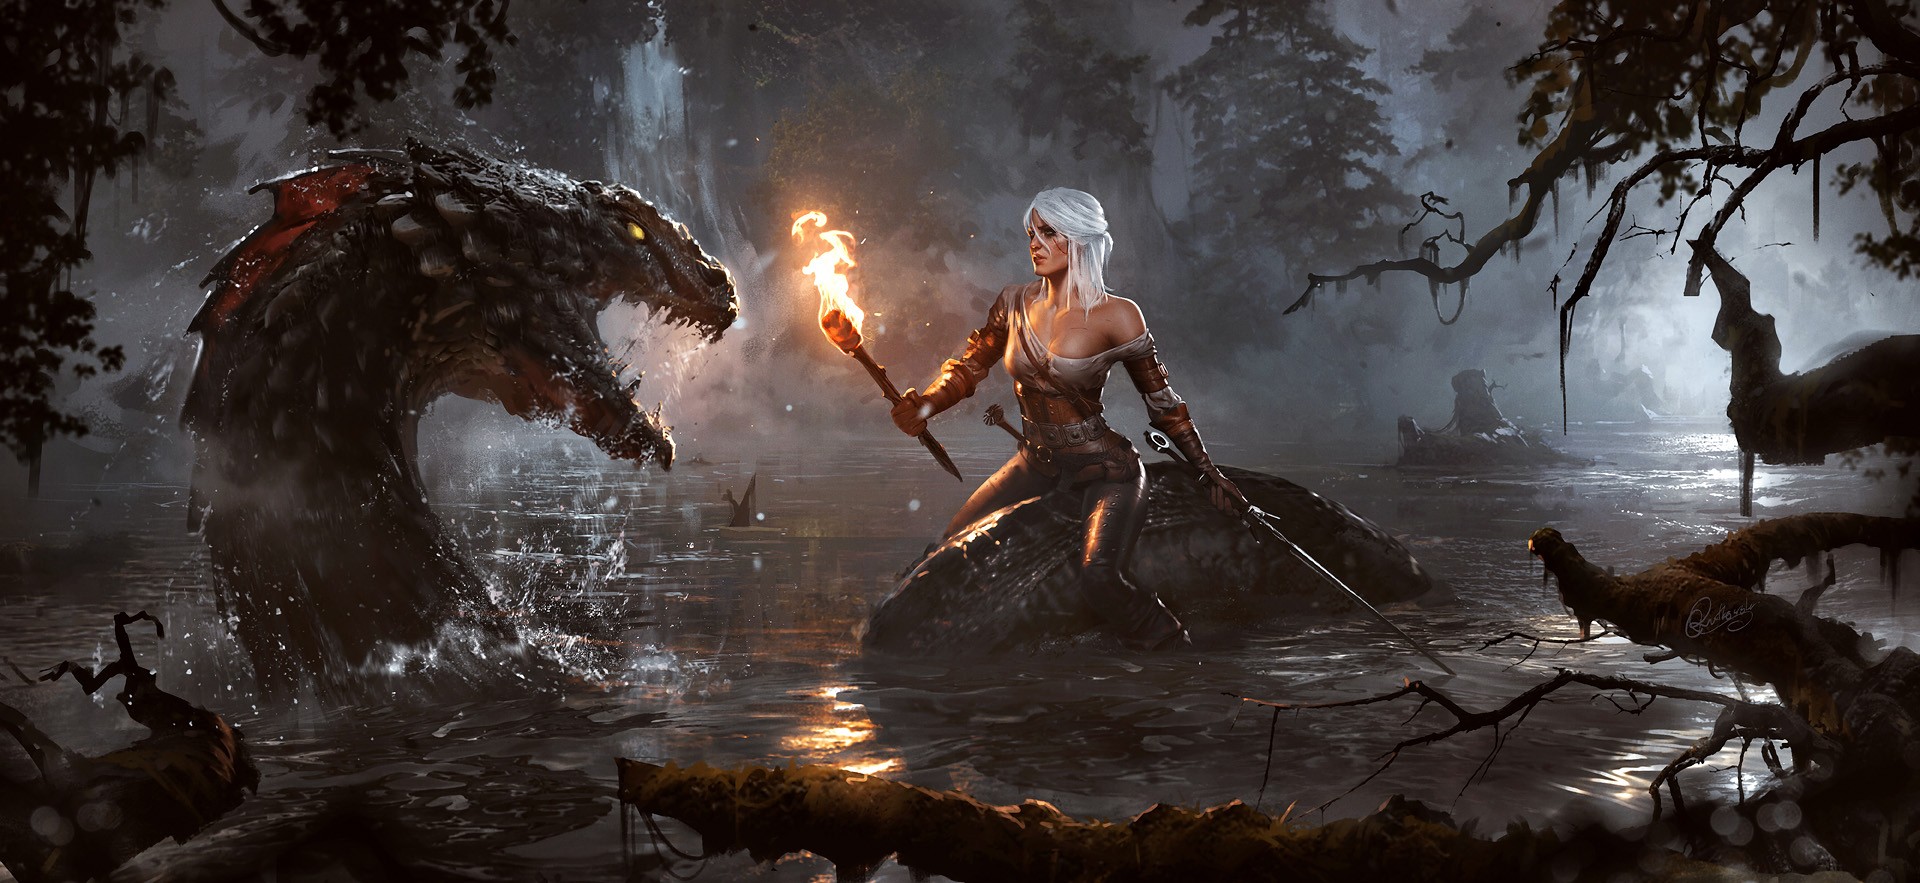 General 1920x883 video games Cirilla Fiona Elen Riannon creature The Witcher 3: Wild Hunt RPG torches fantasy girl fantasy art video game art PC gaming video game girls Video Game Heroes women women with swords video game characters